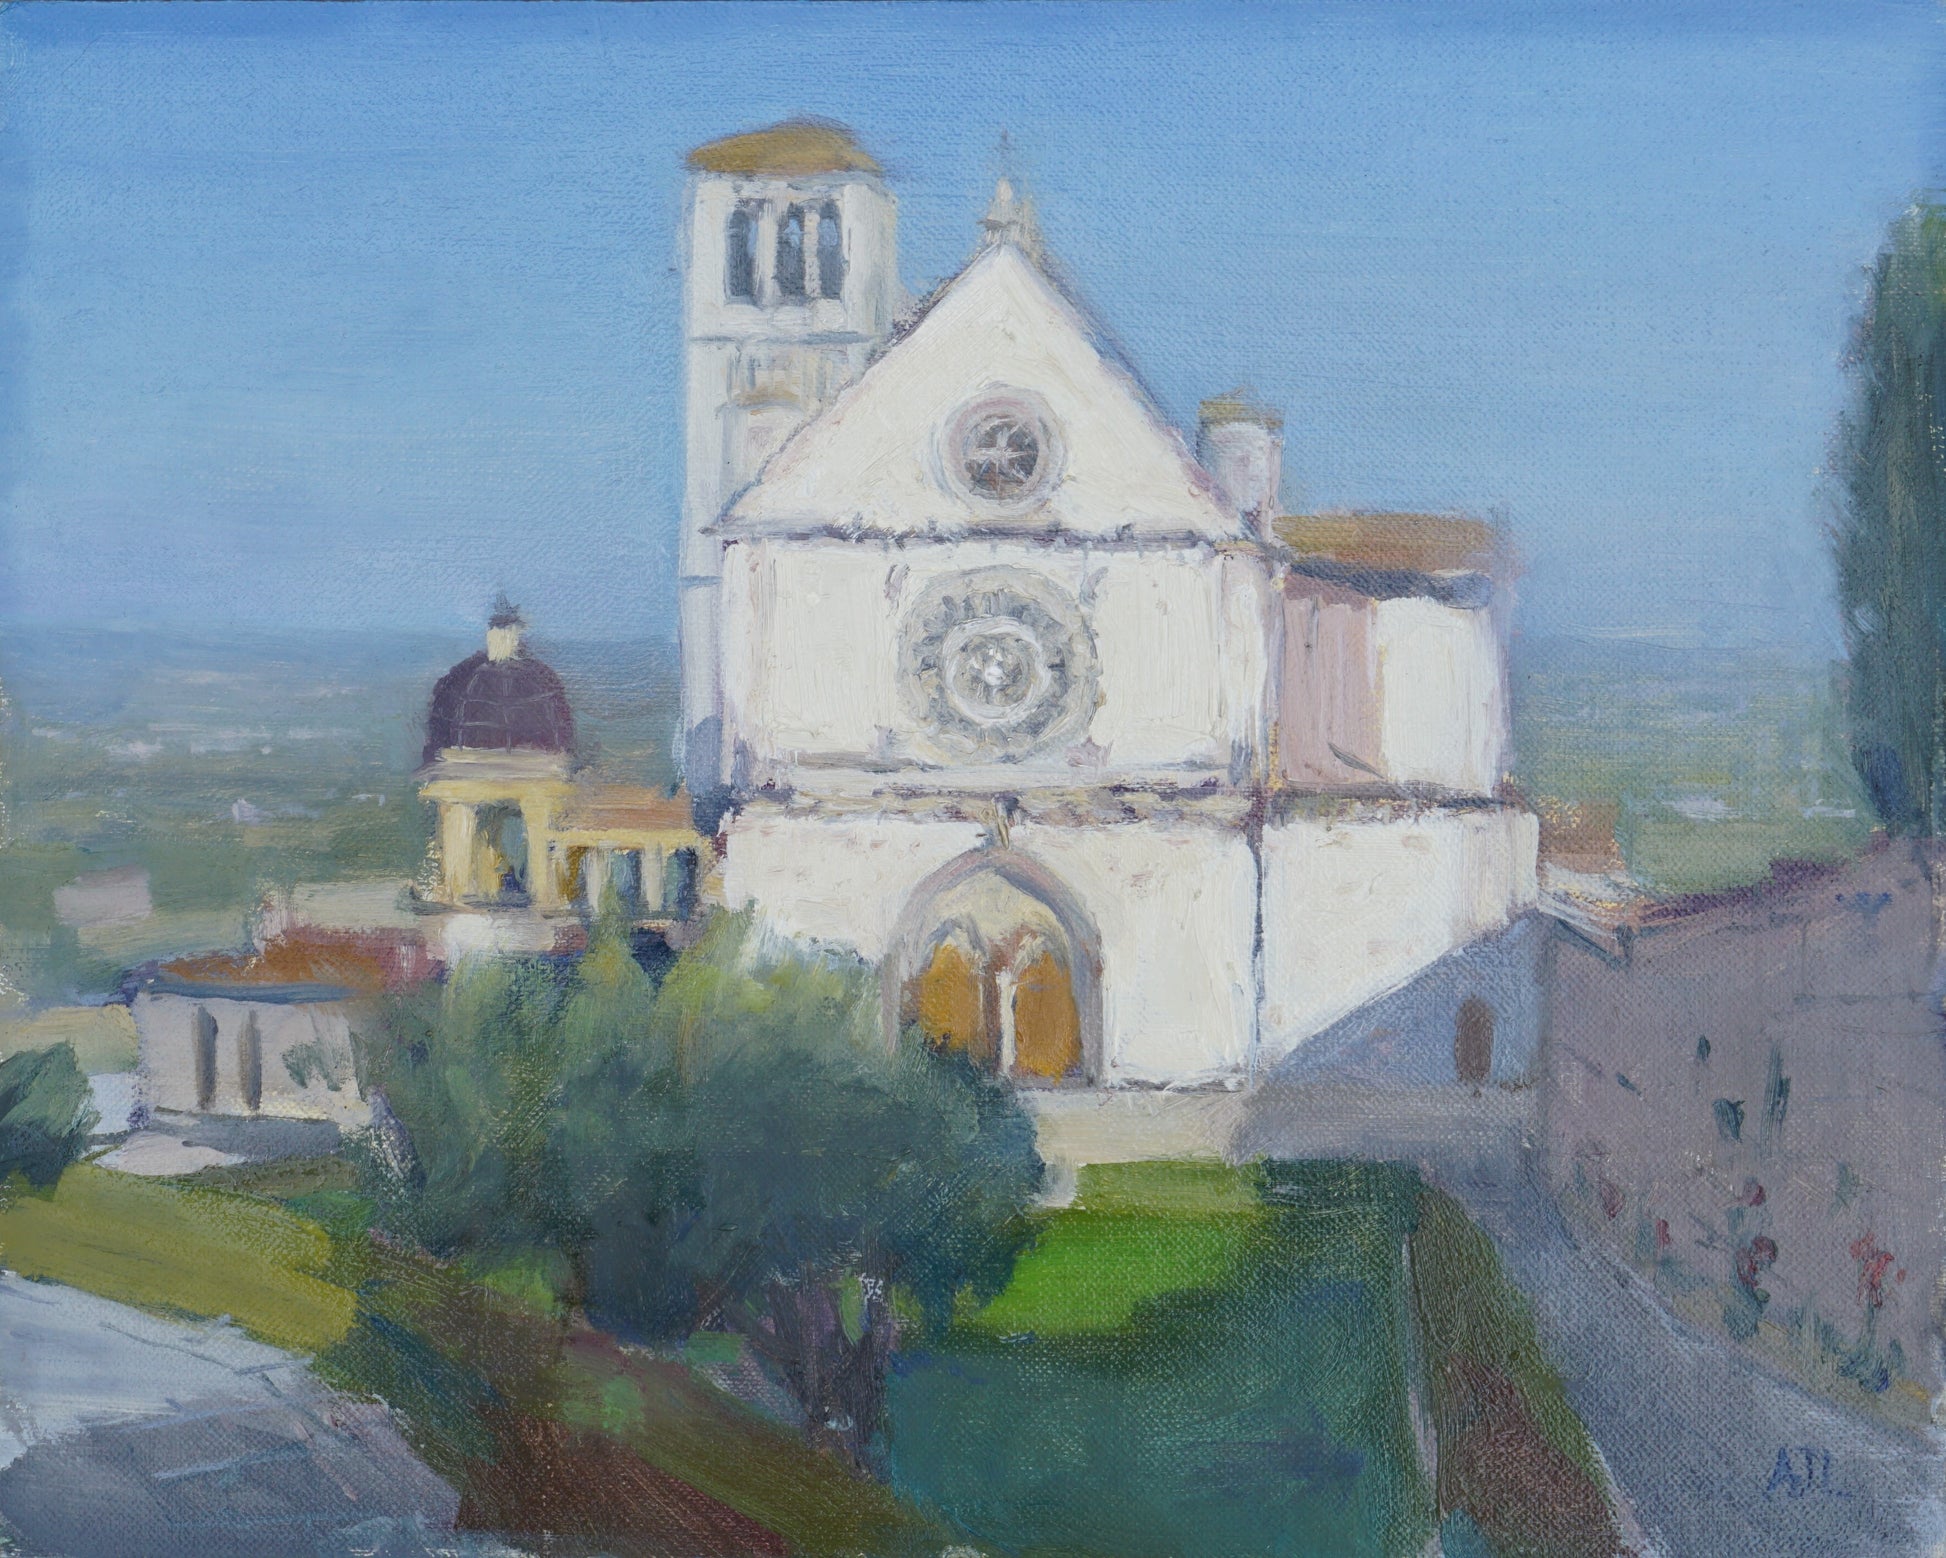 oil painting depicting the basilica of Saint Francis of Assisi